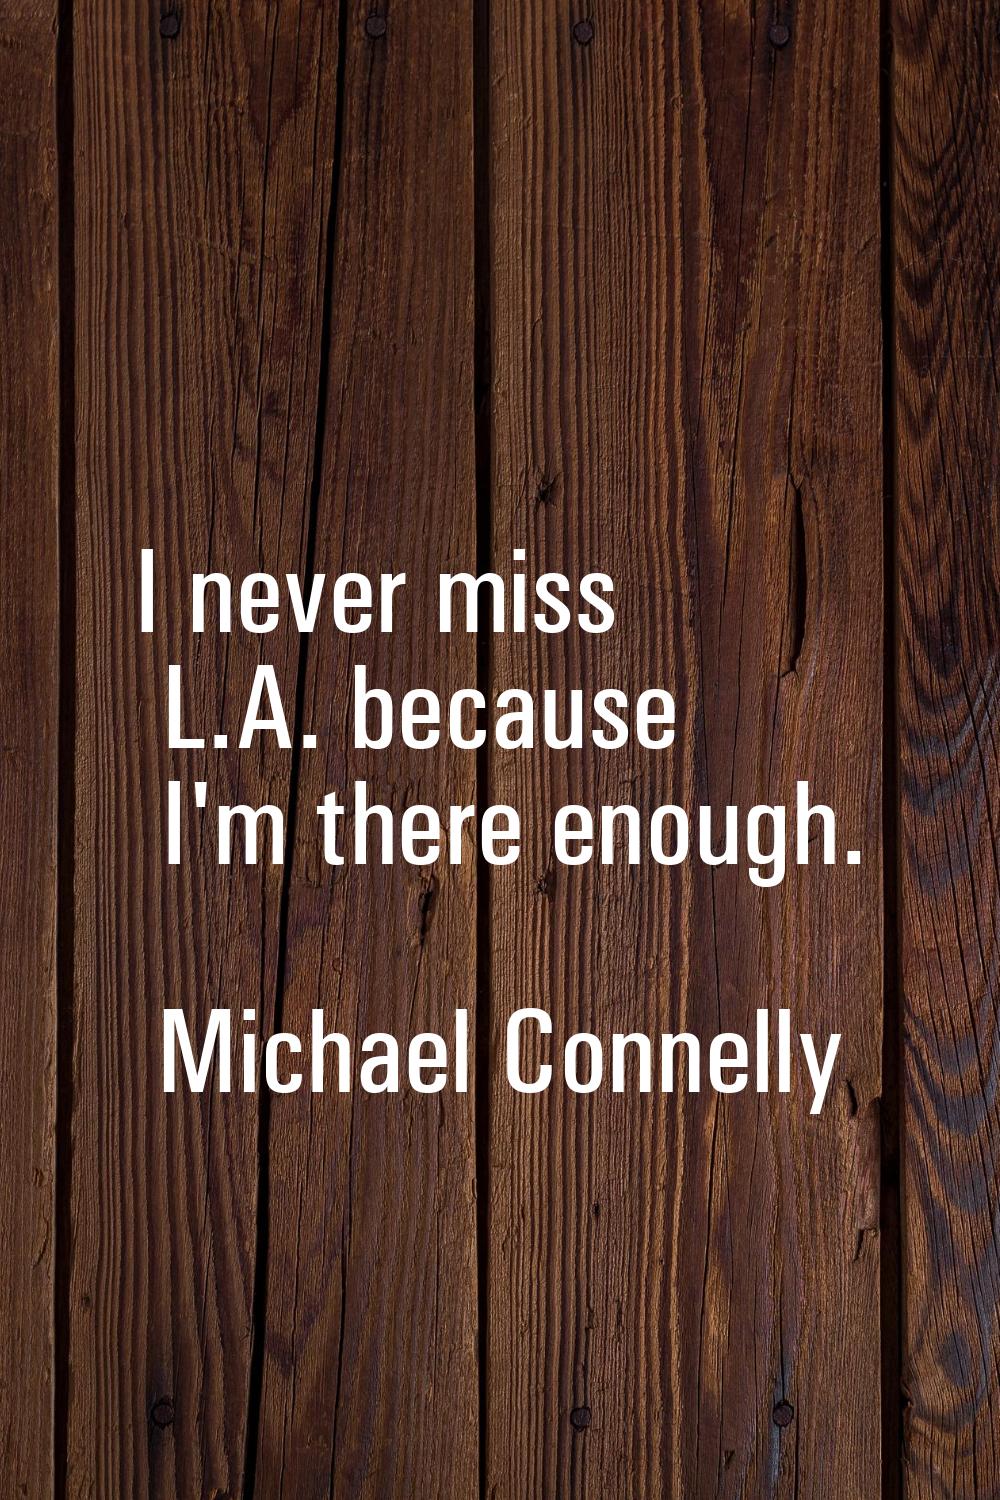 I never miss L.A. because I'm there enough.